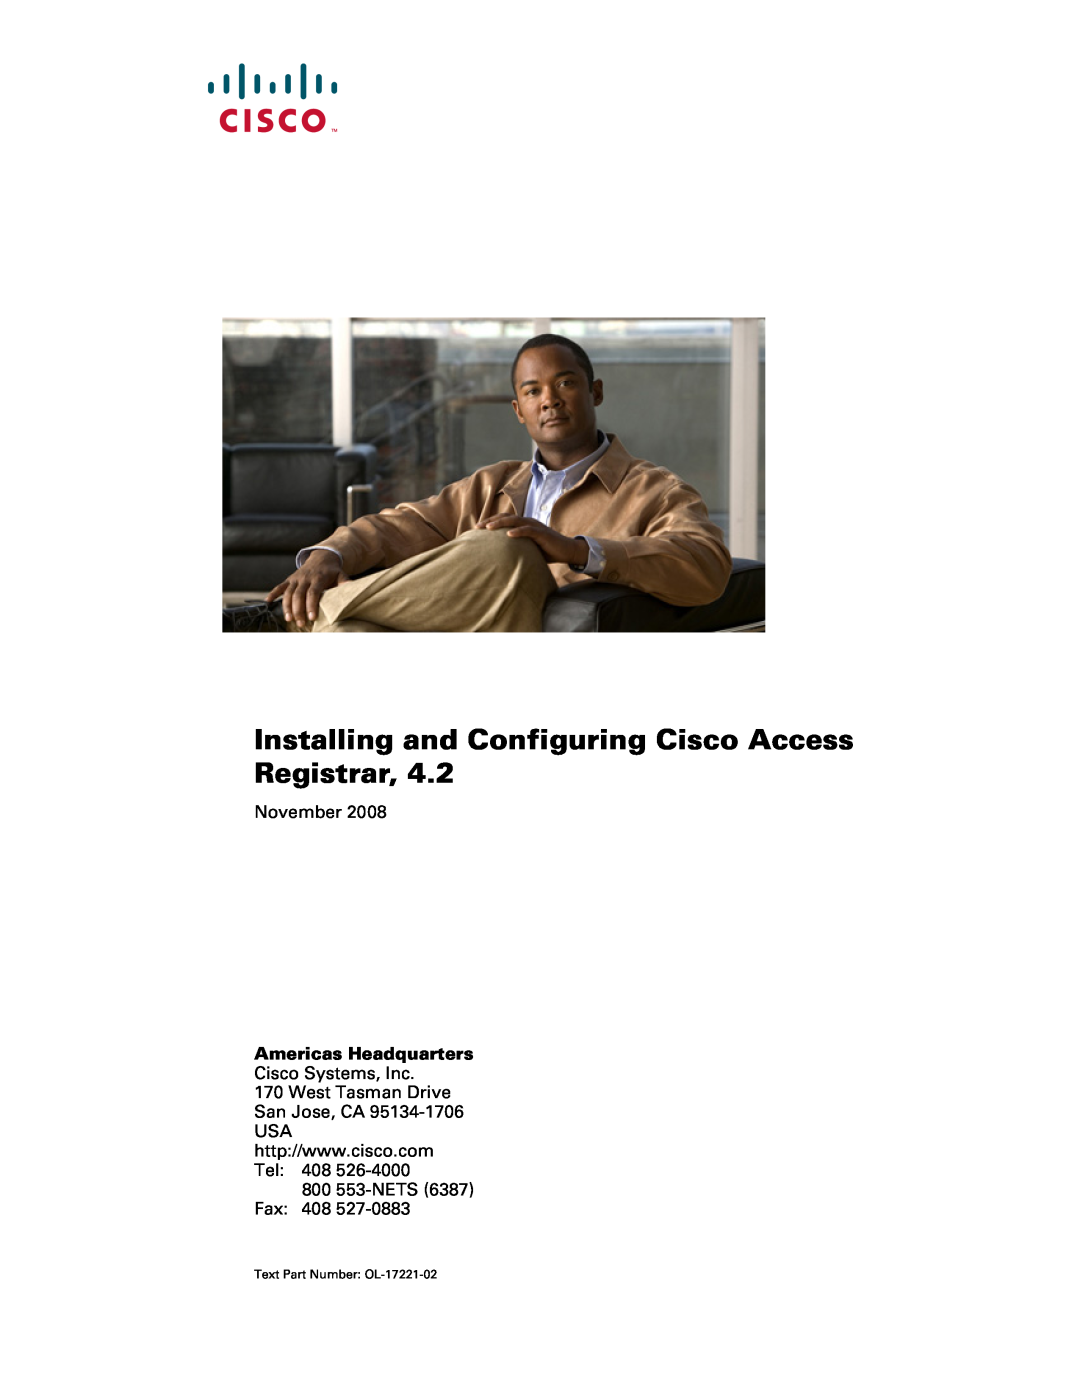 Cisco Systems 4.2 manual Configuring Network Settings on the, C H A P T E R, Configuration Methods, page 